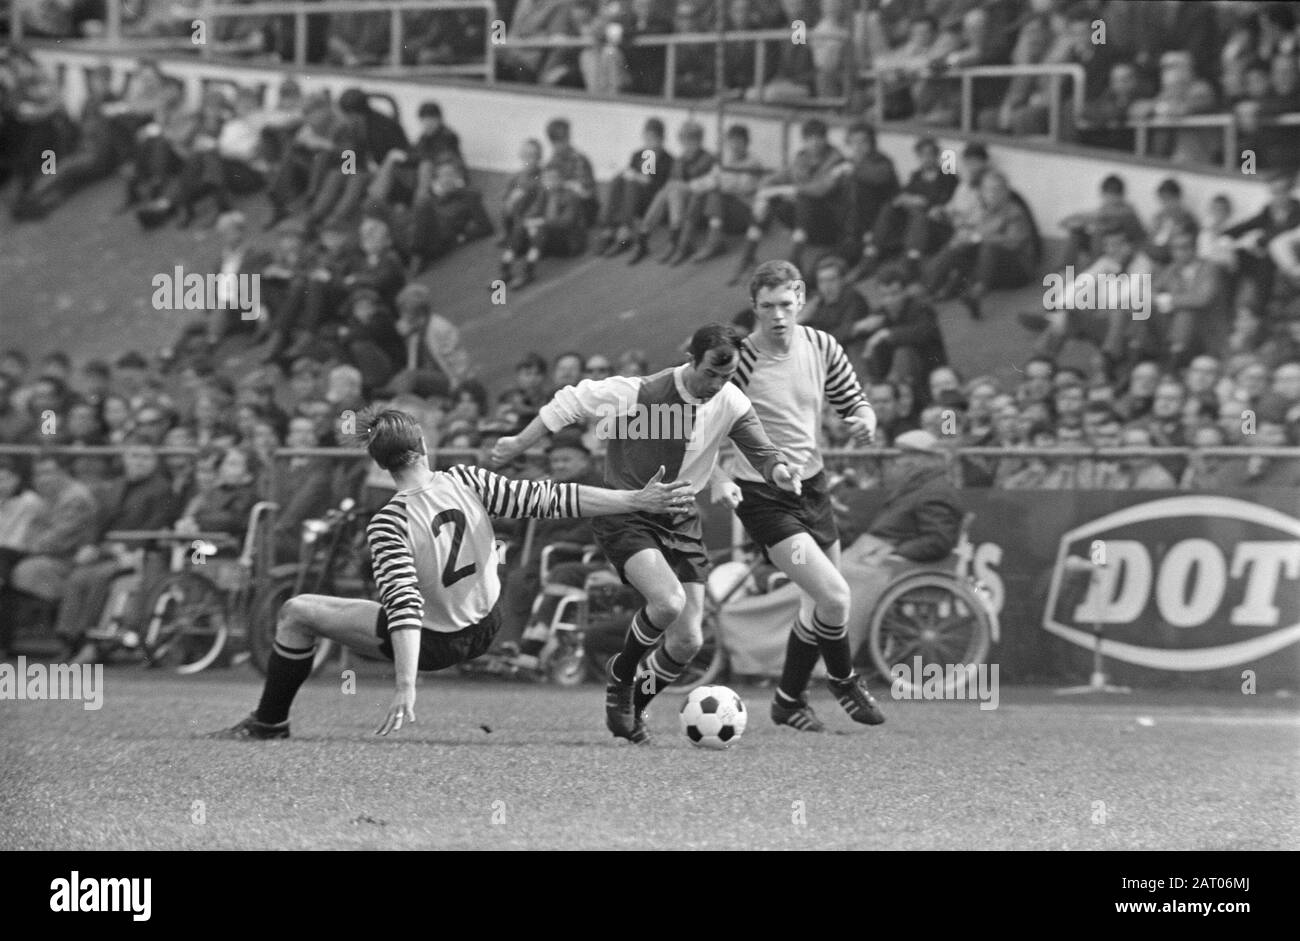 DOS v Feijenoord 3-0; Coen Moulijn is held with arm Date: 27 april 1969 Location: Utrecht Keywords: sport, football Person name: Moulijn, Coen Institution name: DOS, Feyenoord Stock Photo